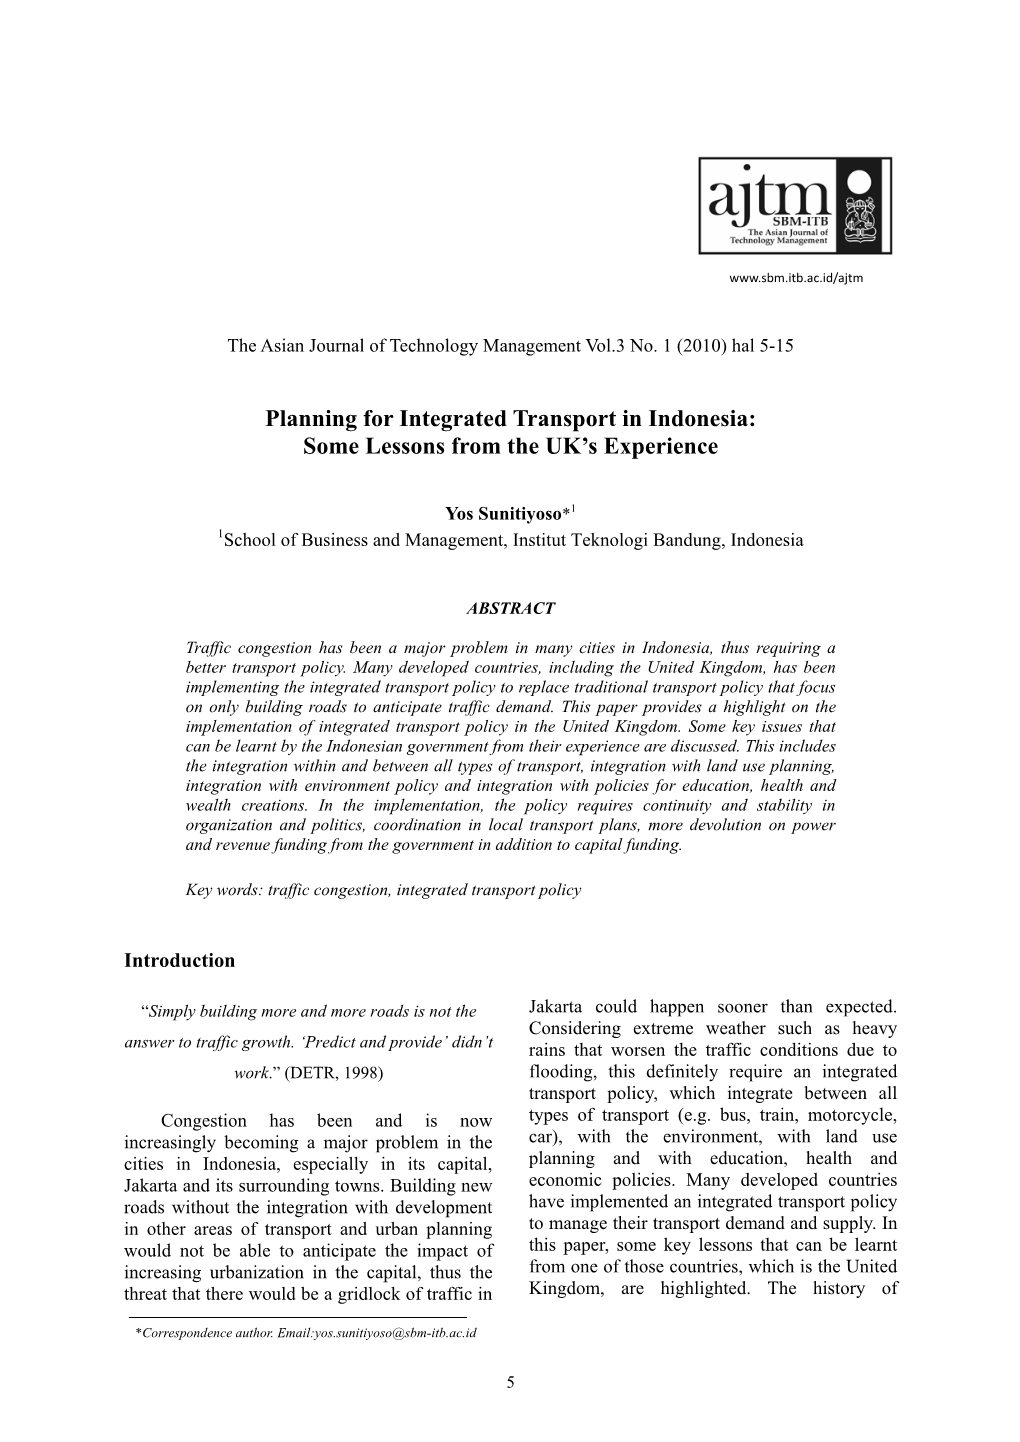 Planning for Integrated Transport in Indonesia: Some Lessons from the UK’S Experience